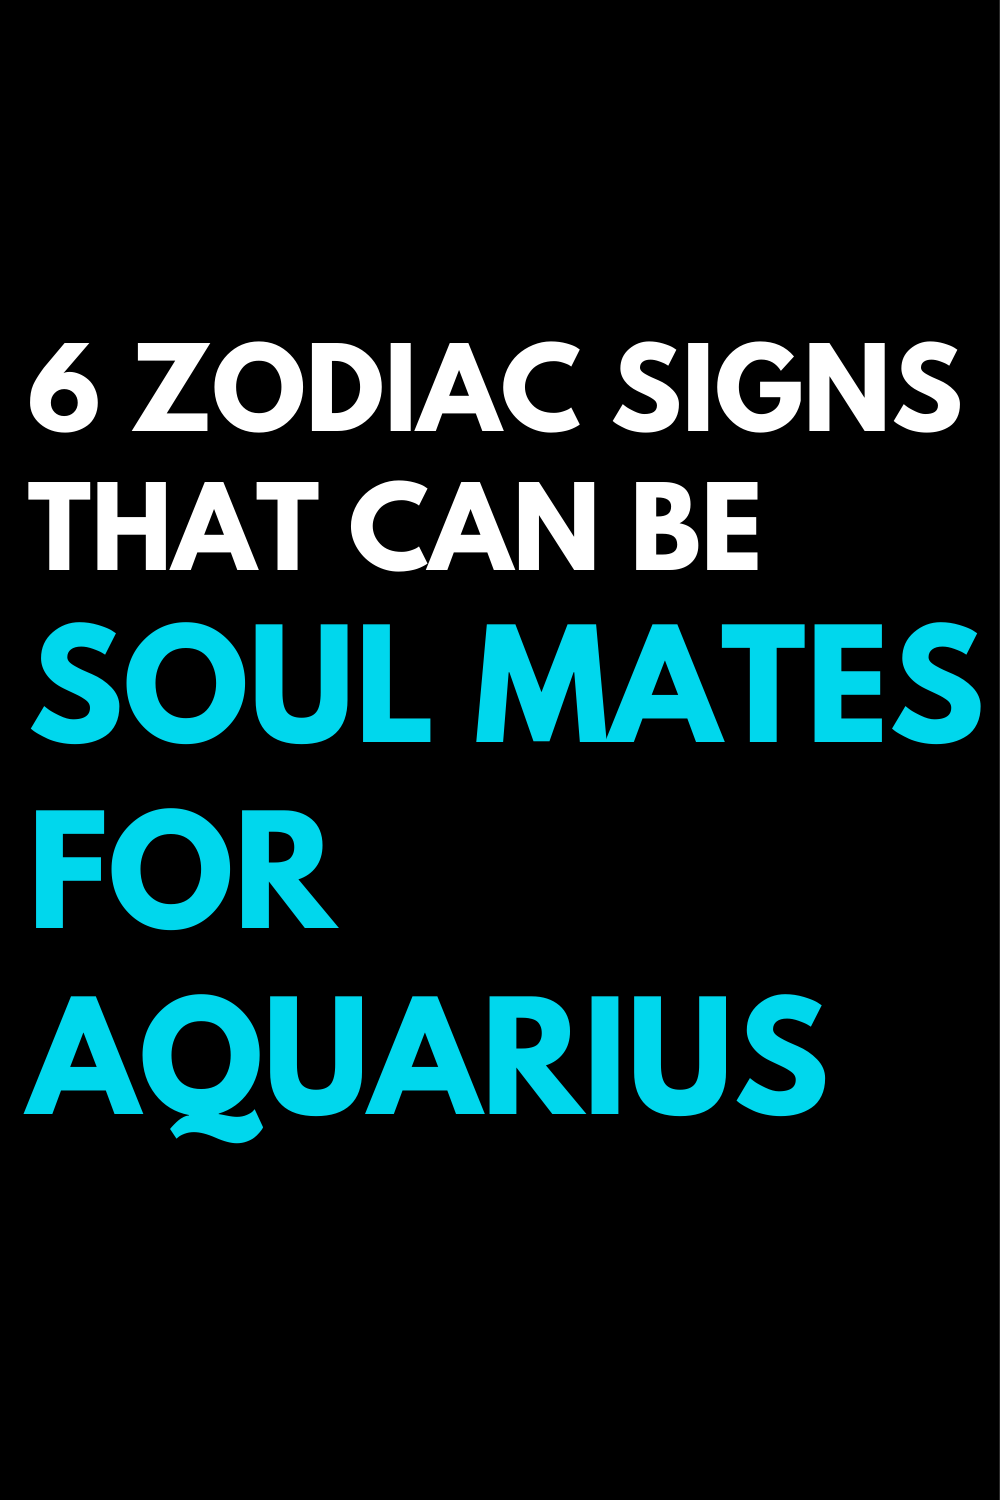 6 zodiac signs that can be soul mates for Aquarius